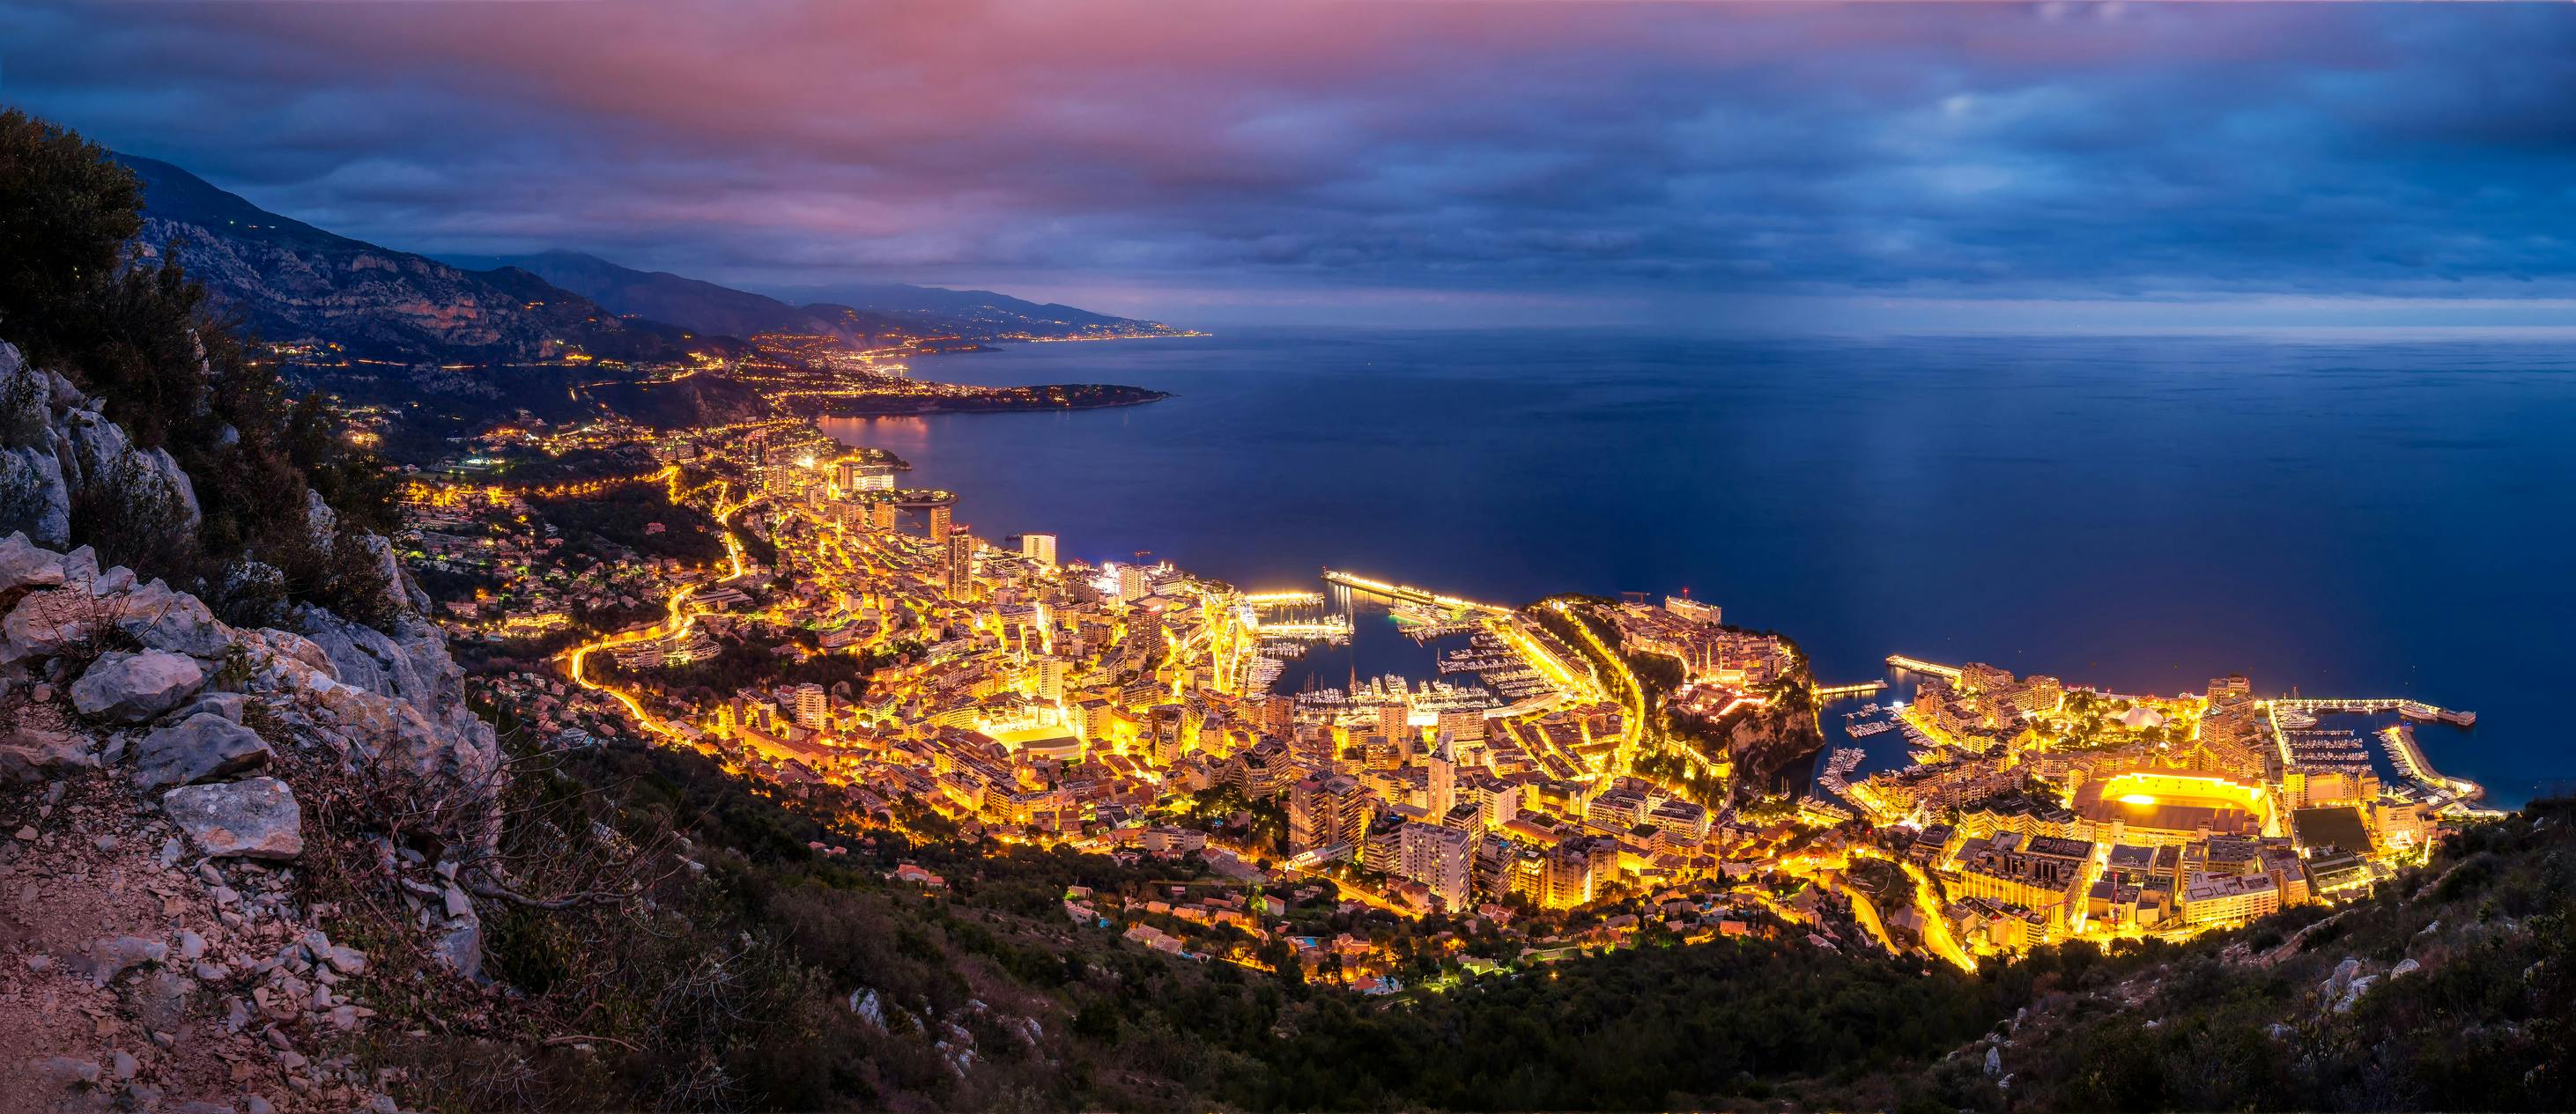 Guided tour of Monte Carlo and Monaco - Private Official Guide !